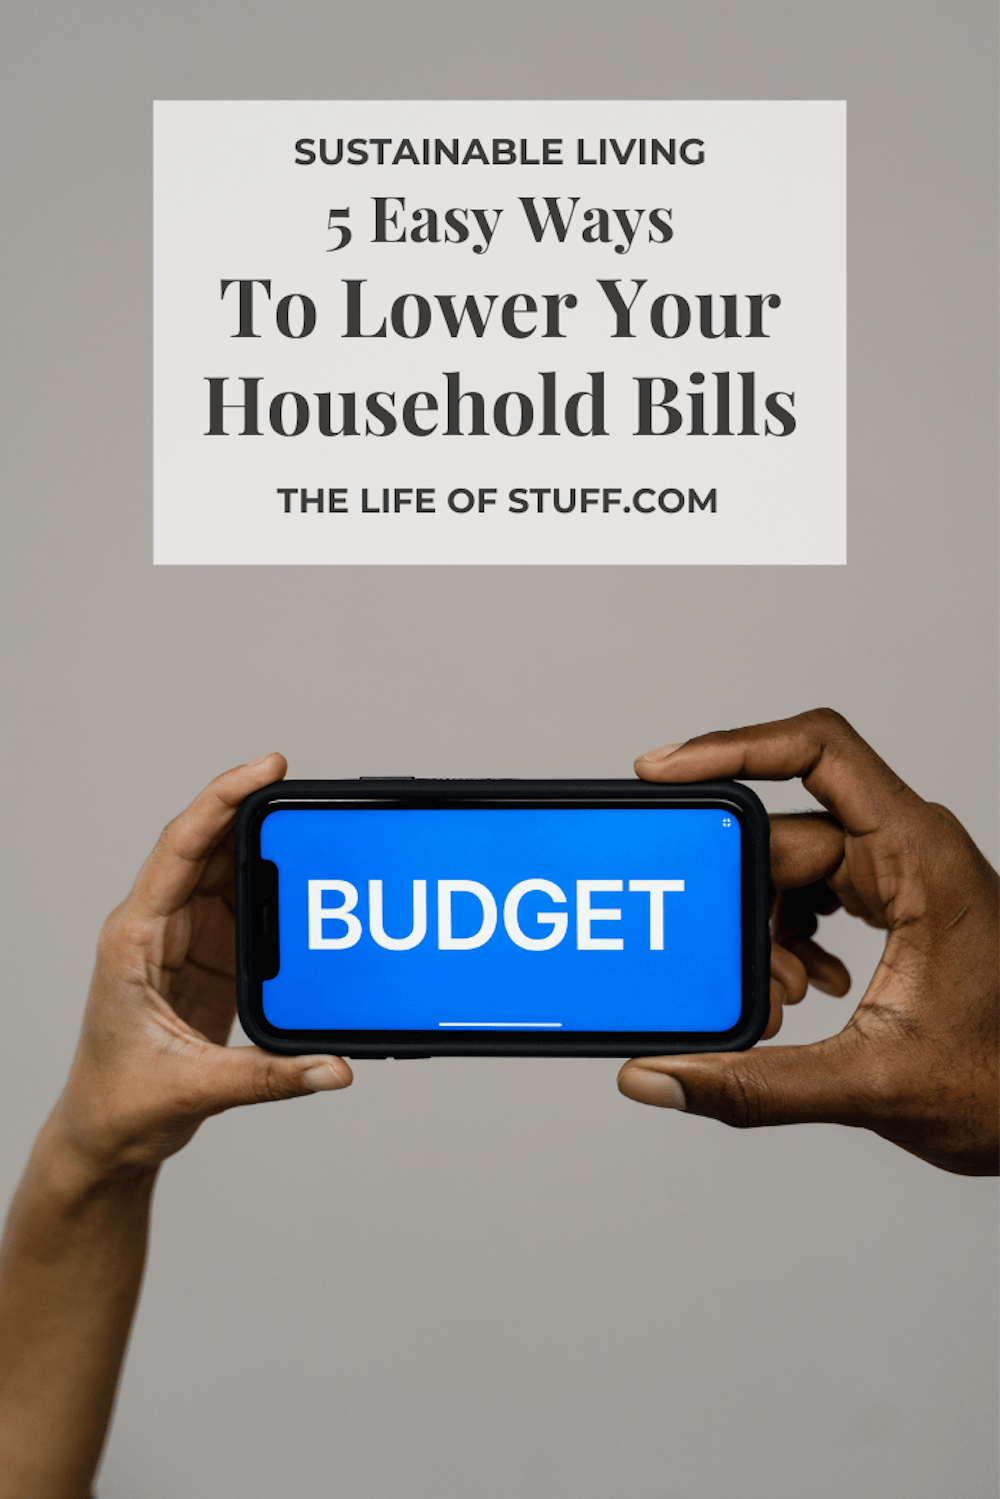 Sustainable Living - 5 Easy Ways To Lower Your Household Bills - The Life of Stuff